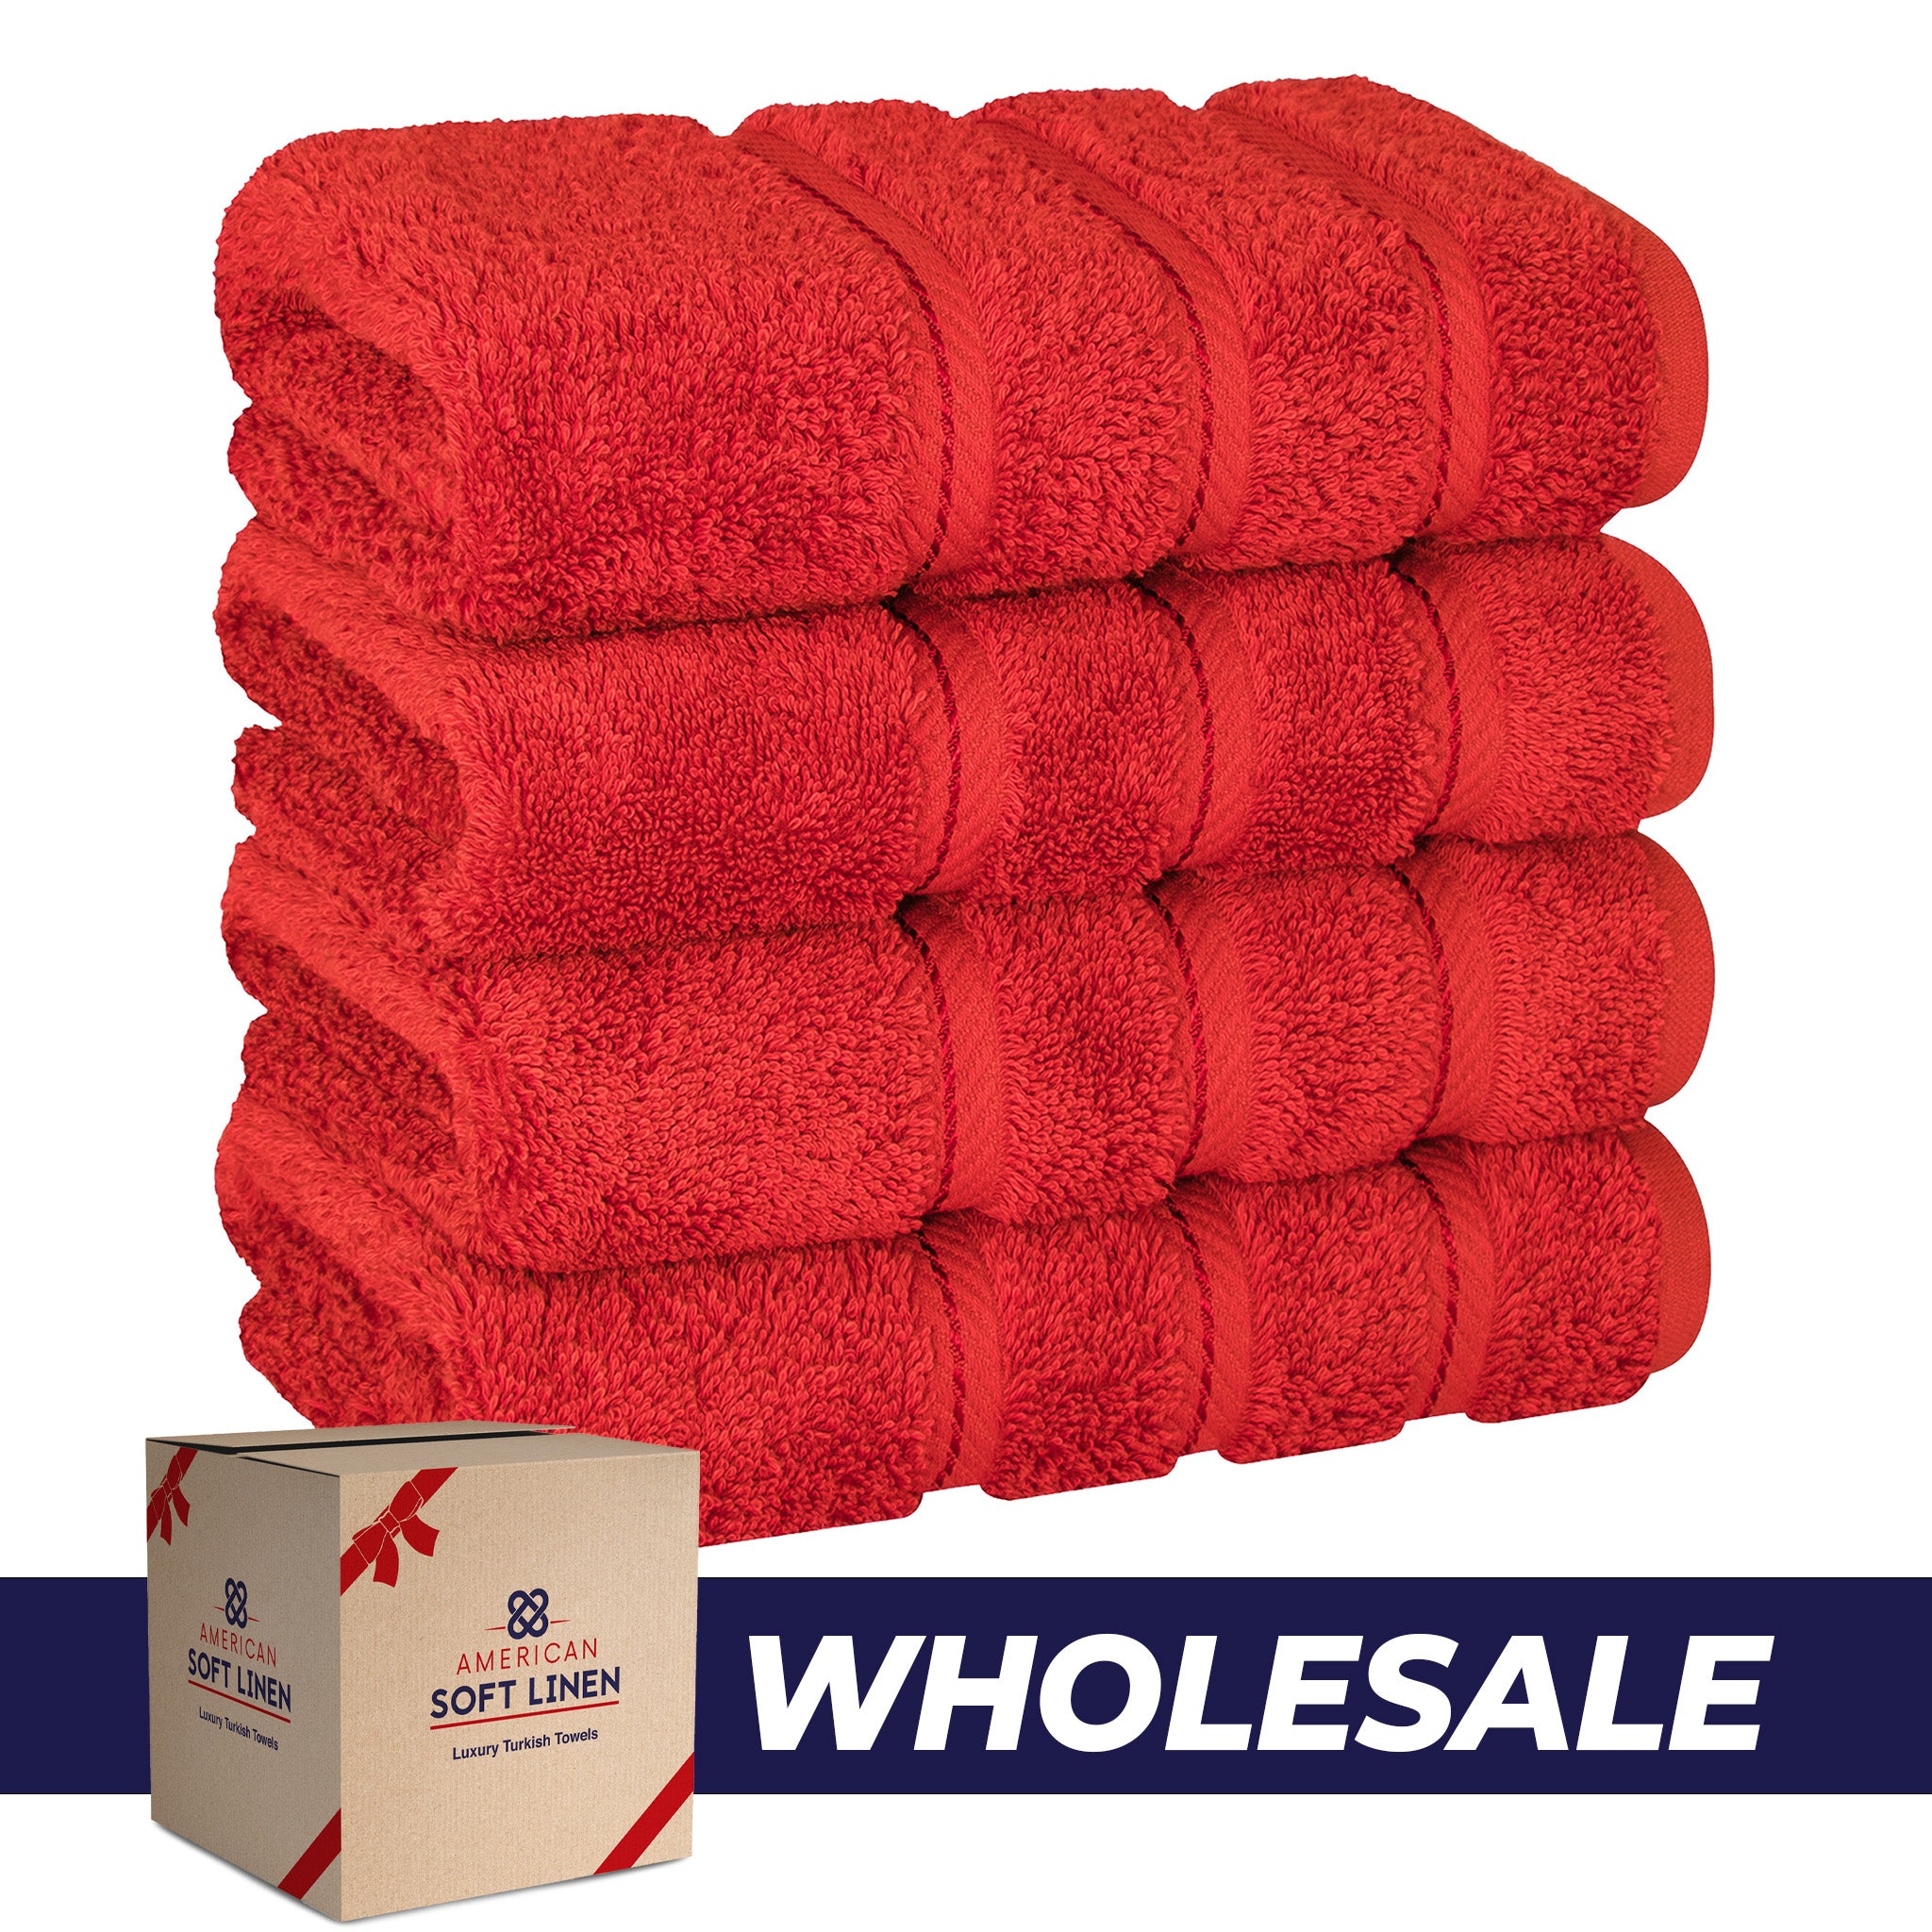 American Soft Linen 100% Turkish Cotton 4 Pack Hand Towel Set Wholesale red-0